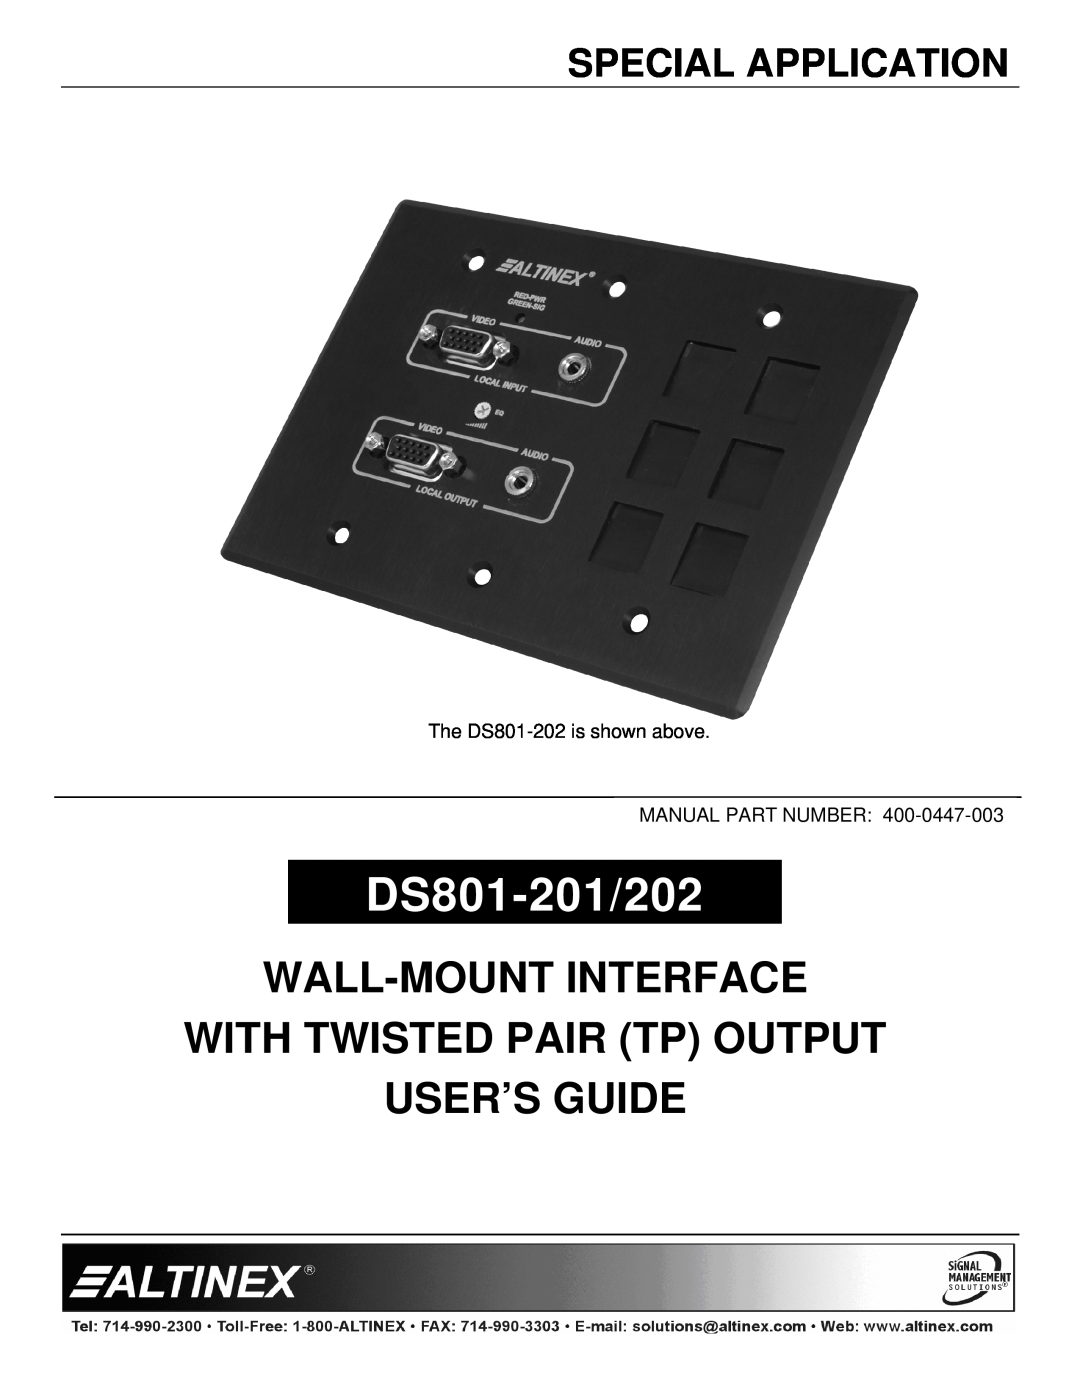 Altinex manual Special Application, DS801-201/202, Wall-Mount Interface With Twisted Pair Tp Output User’S Guide 